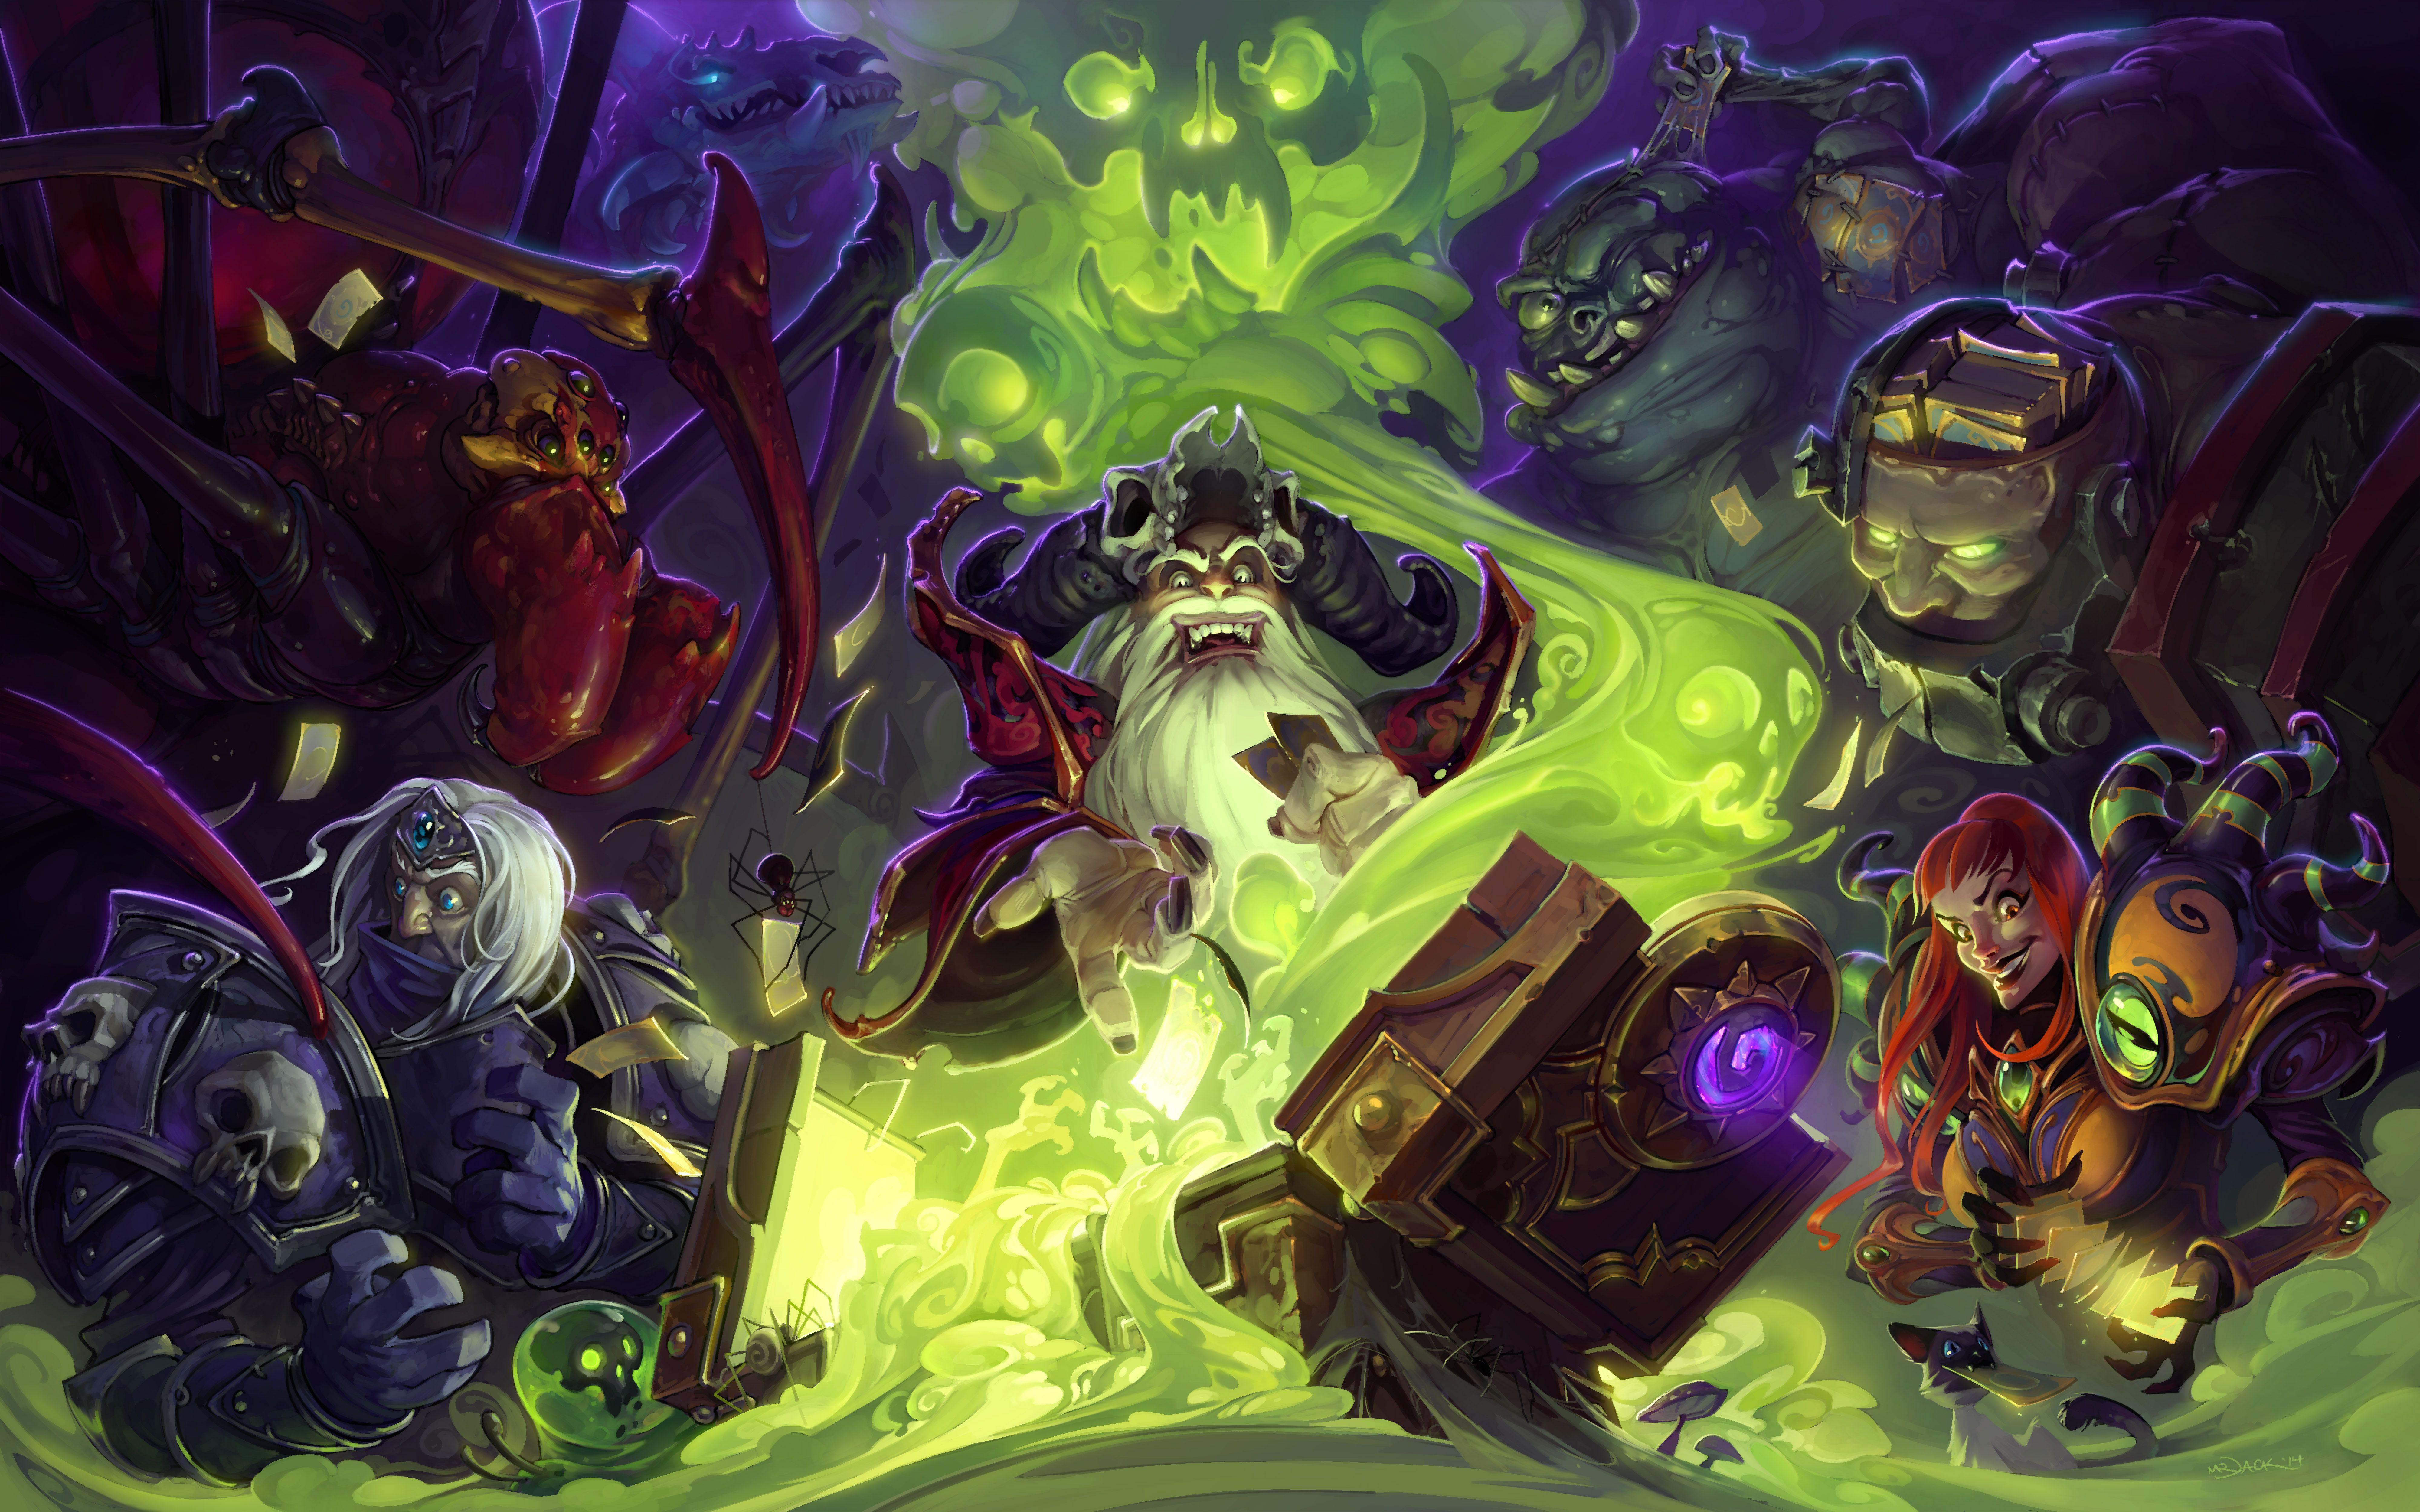 5120x1440p 329 hearthstone wallpapers